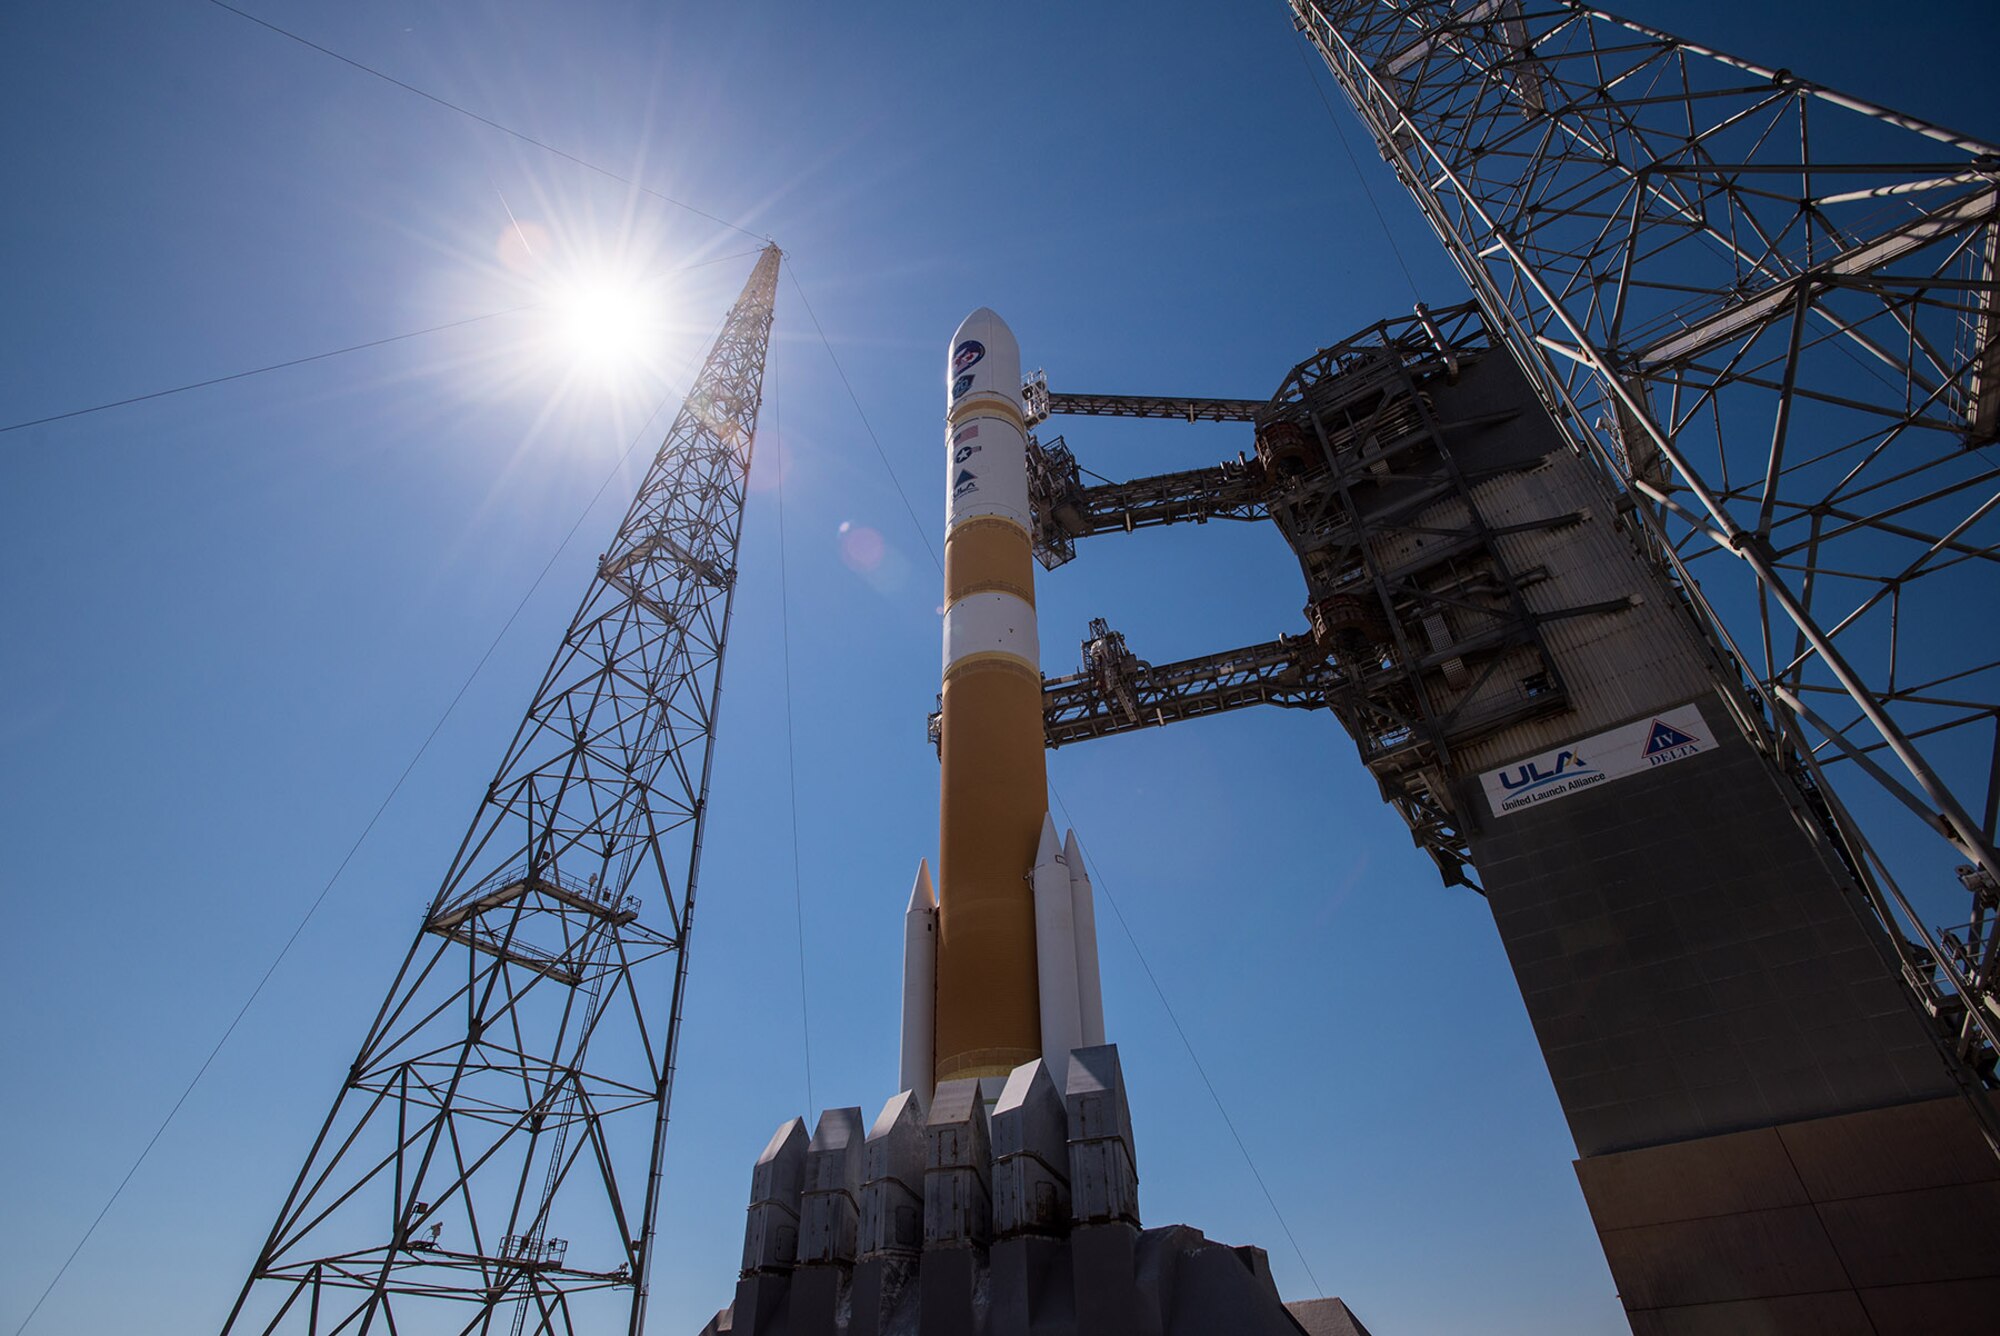 The U.S. Air Force’s 45th Space Wing supported United Launch Alliance’s successful launch of the WGS-9 spacecraft aboard a ULA Delta IV rocket from Space Launch Complex 37 at 8:18 p.m. ET March 18, 2017, at Cape Canaveral Air Force Station, Fla.  The Air Force has been breaking barriers since 1947 and the successful WGS-9 launch marks an important occasion for the Wideband constellation as it is a major milestone in a 20-year multilateral partnership. (Courtesy photo/ULA)